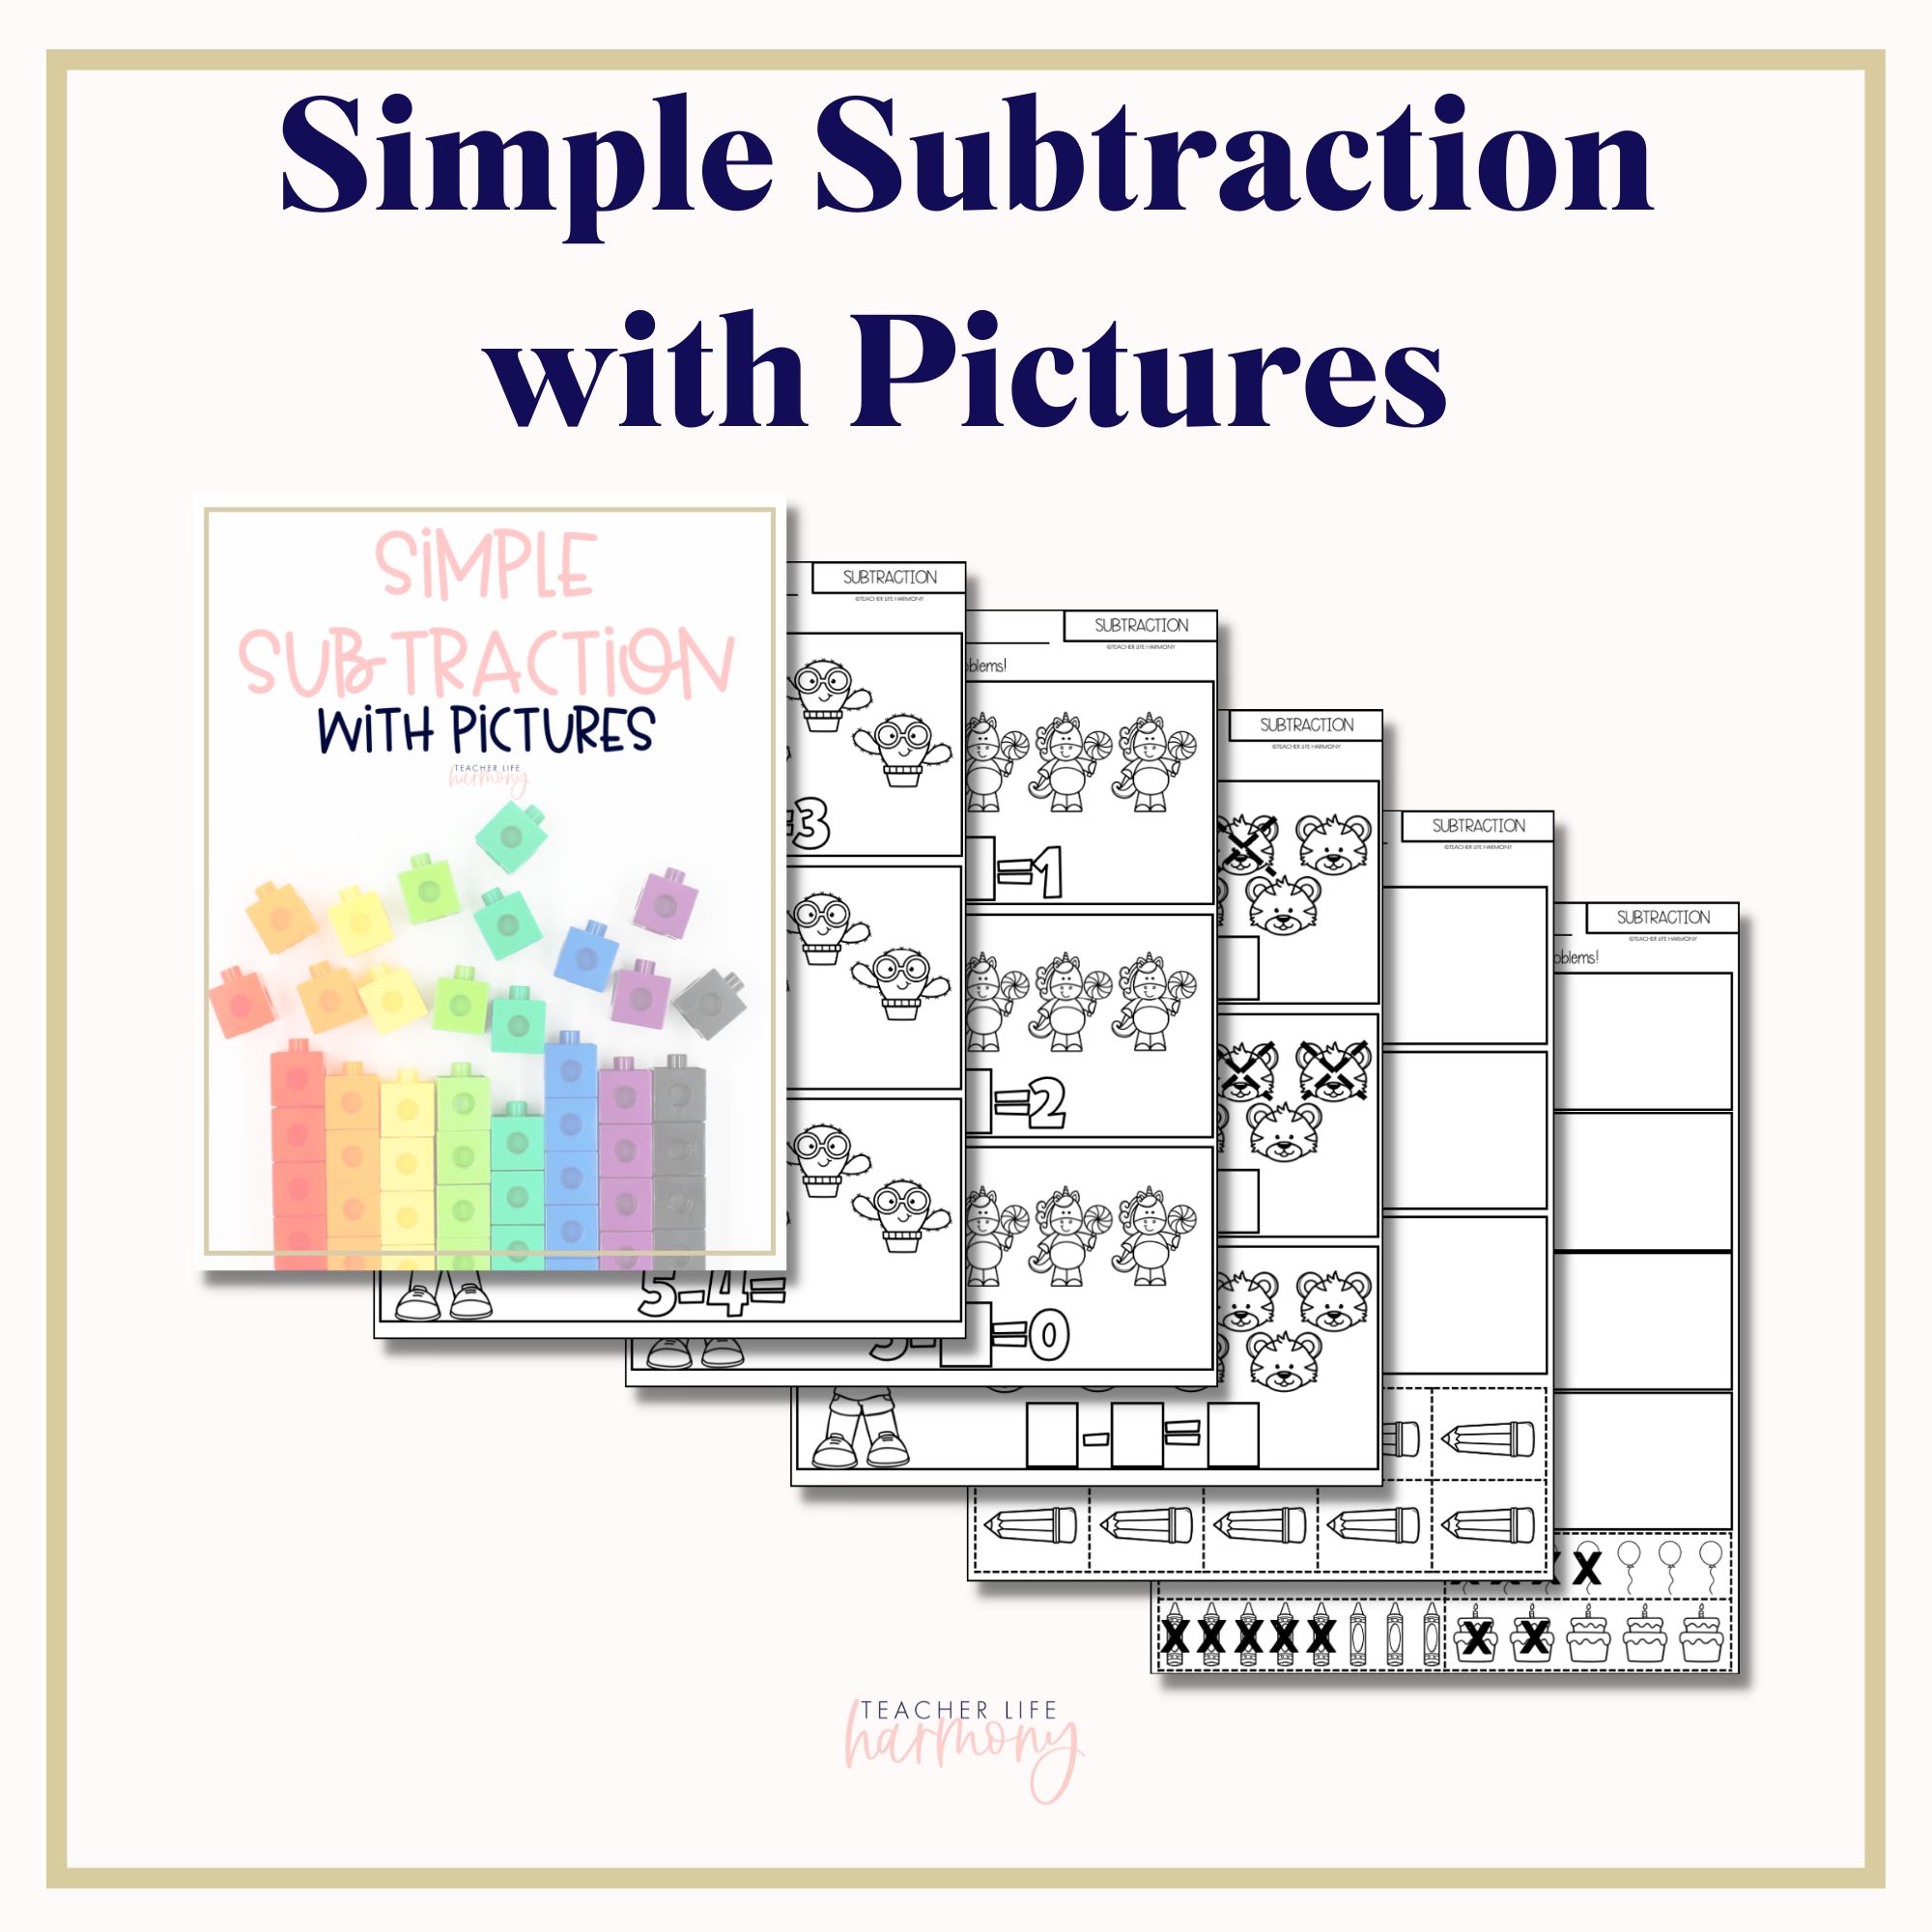 Simple Subtraction with Pictures